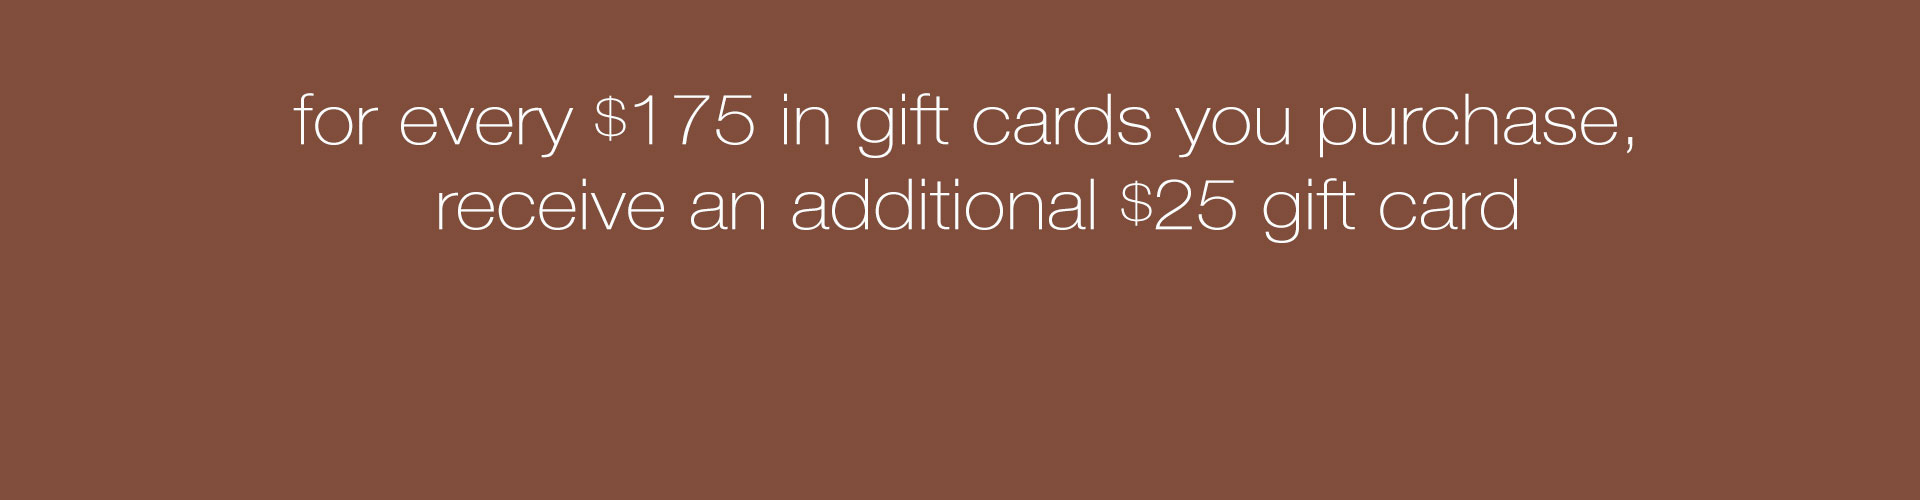  ab gift cards 